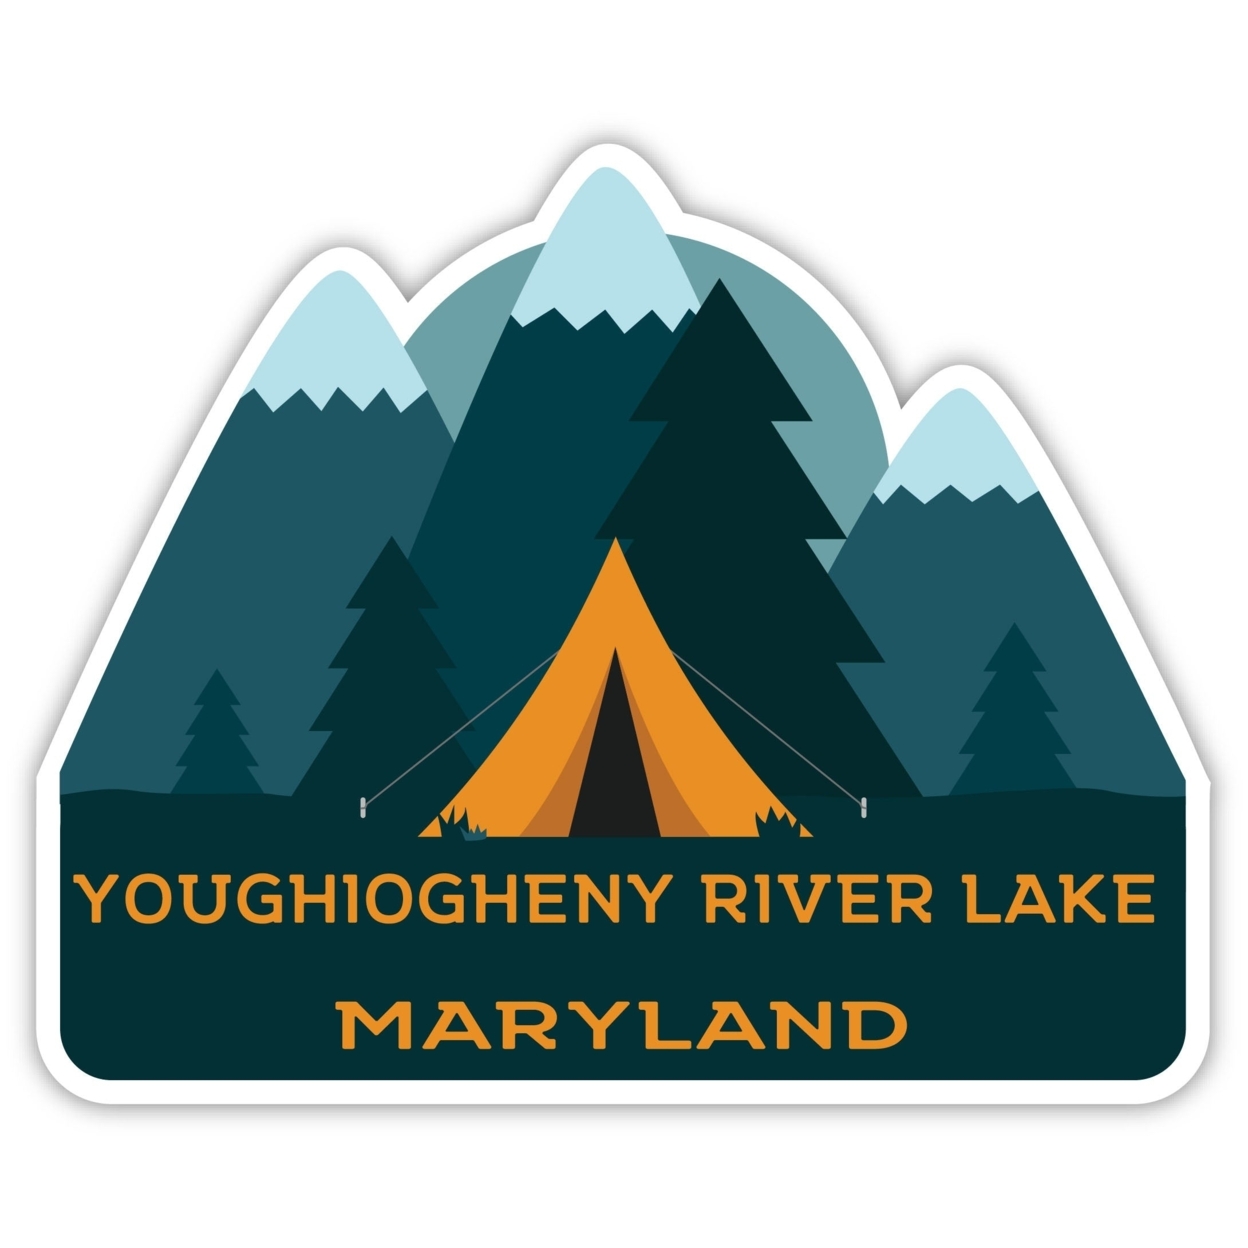 Youghiogheny River Lake Maryland Souvenir Decorative Stickers (Choose Theme And Size) - Single Unit, 2-Inch, Tent